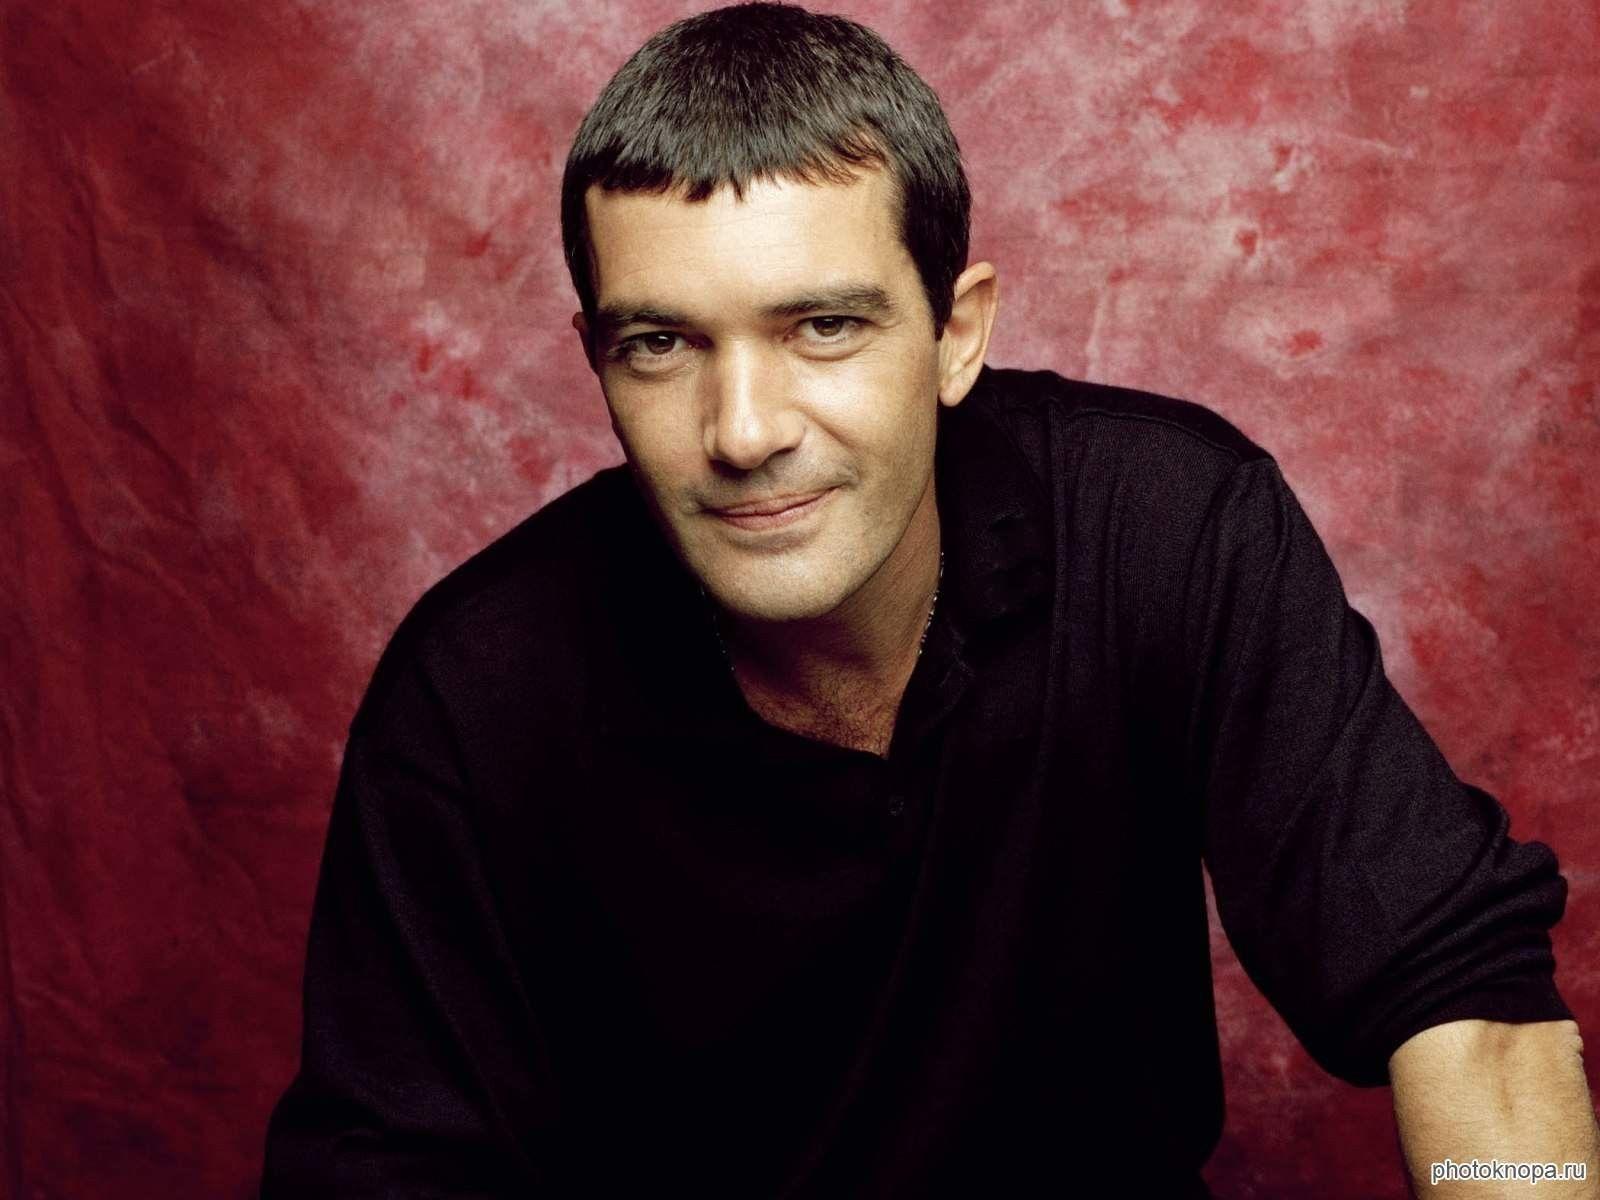 Antonio banderas wallpapers and backgrounds